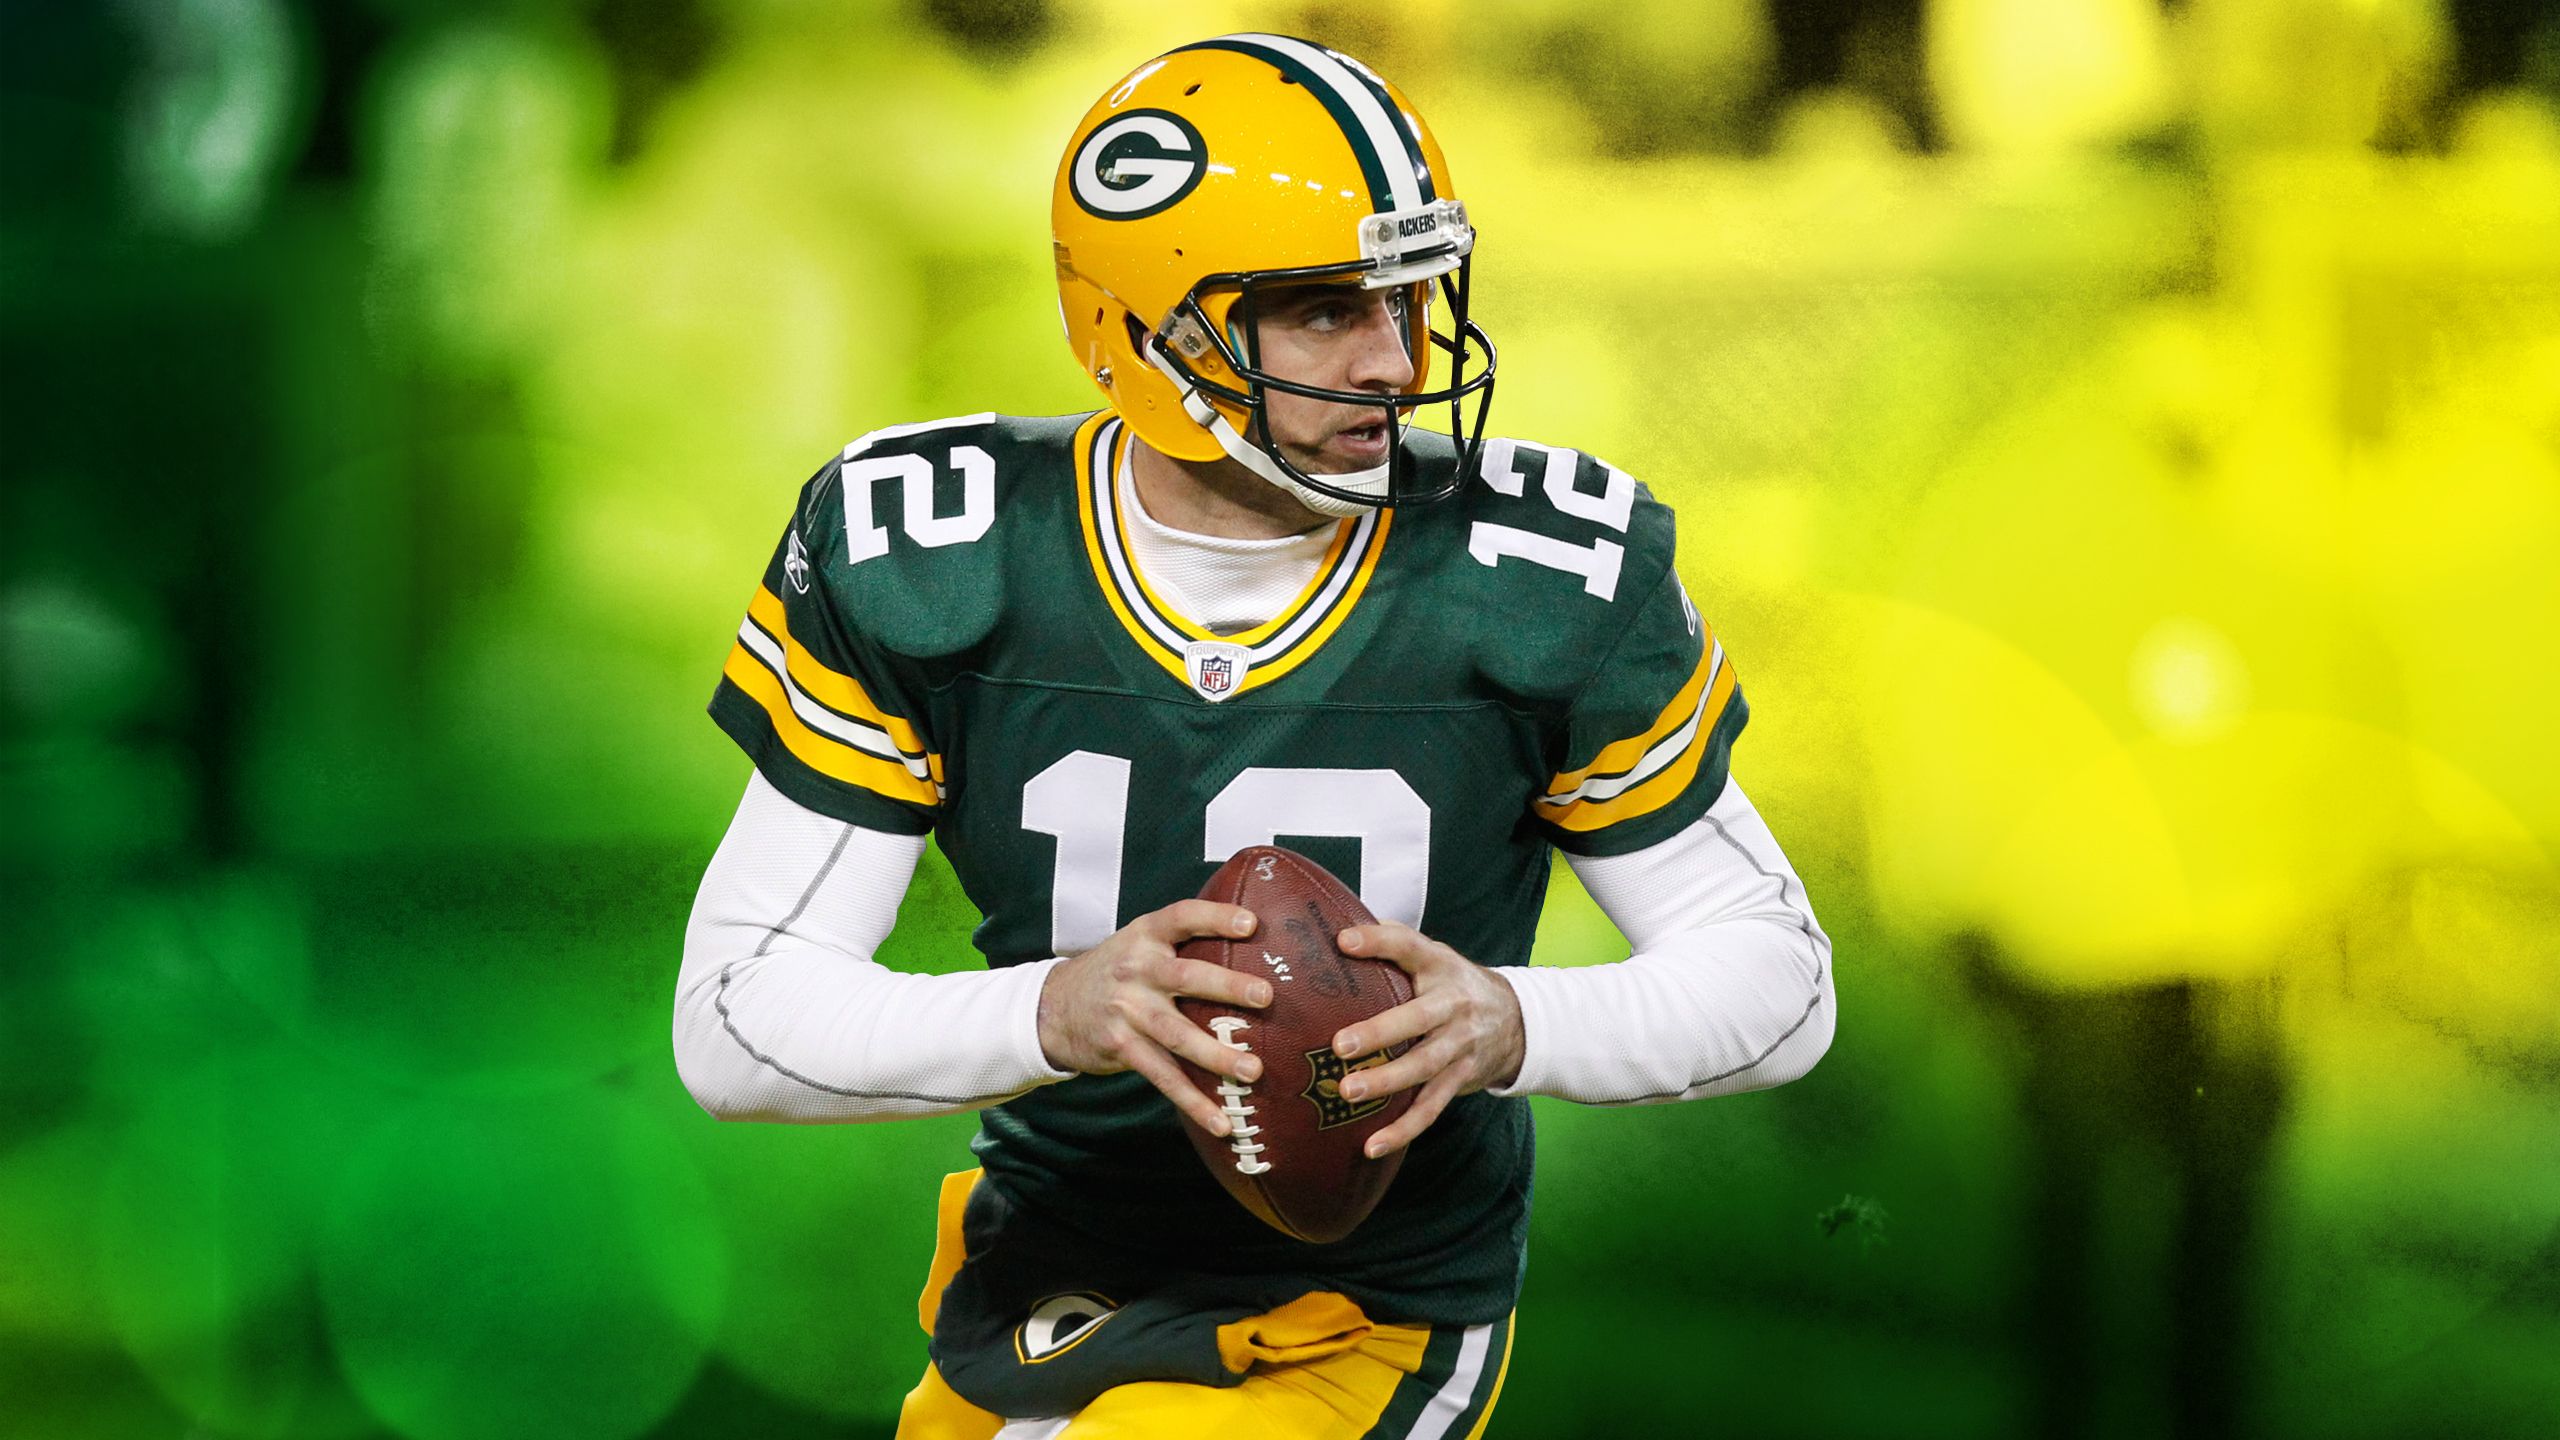 Aaron Rodgers free HD Backgrounds